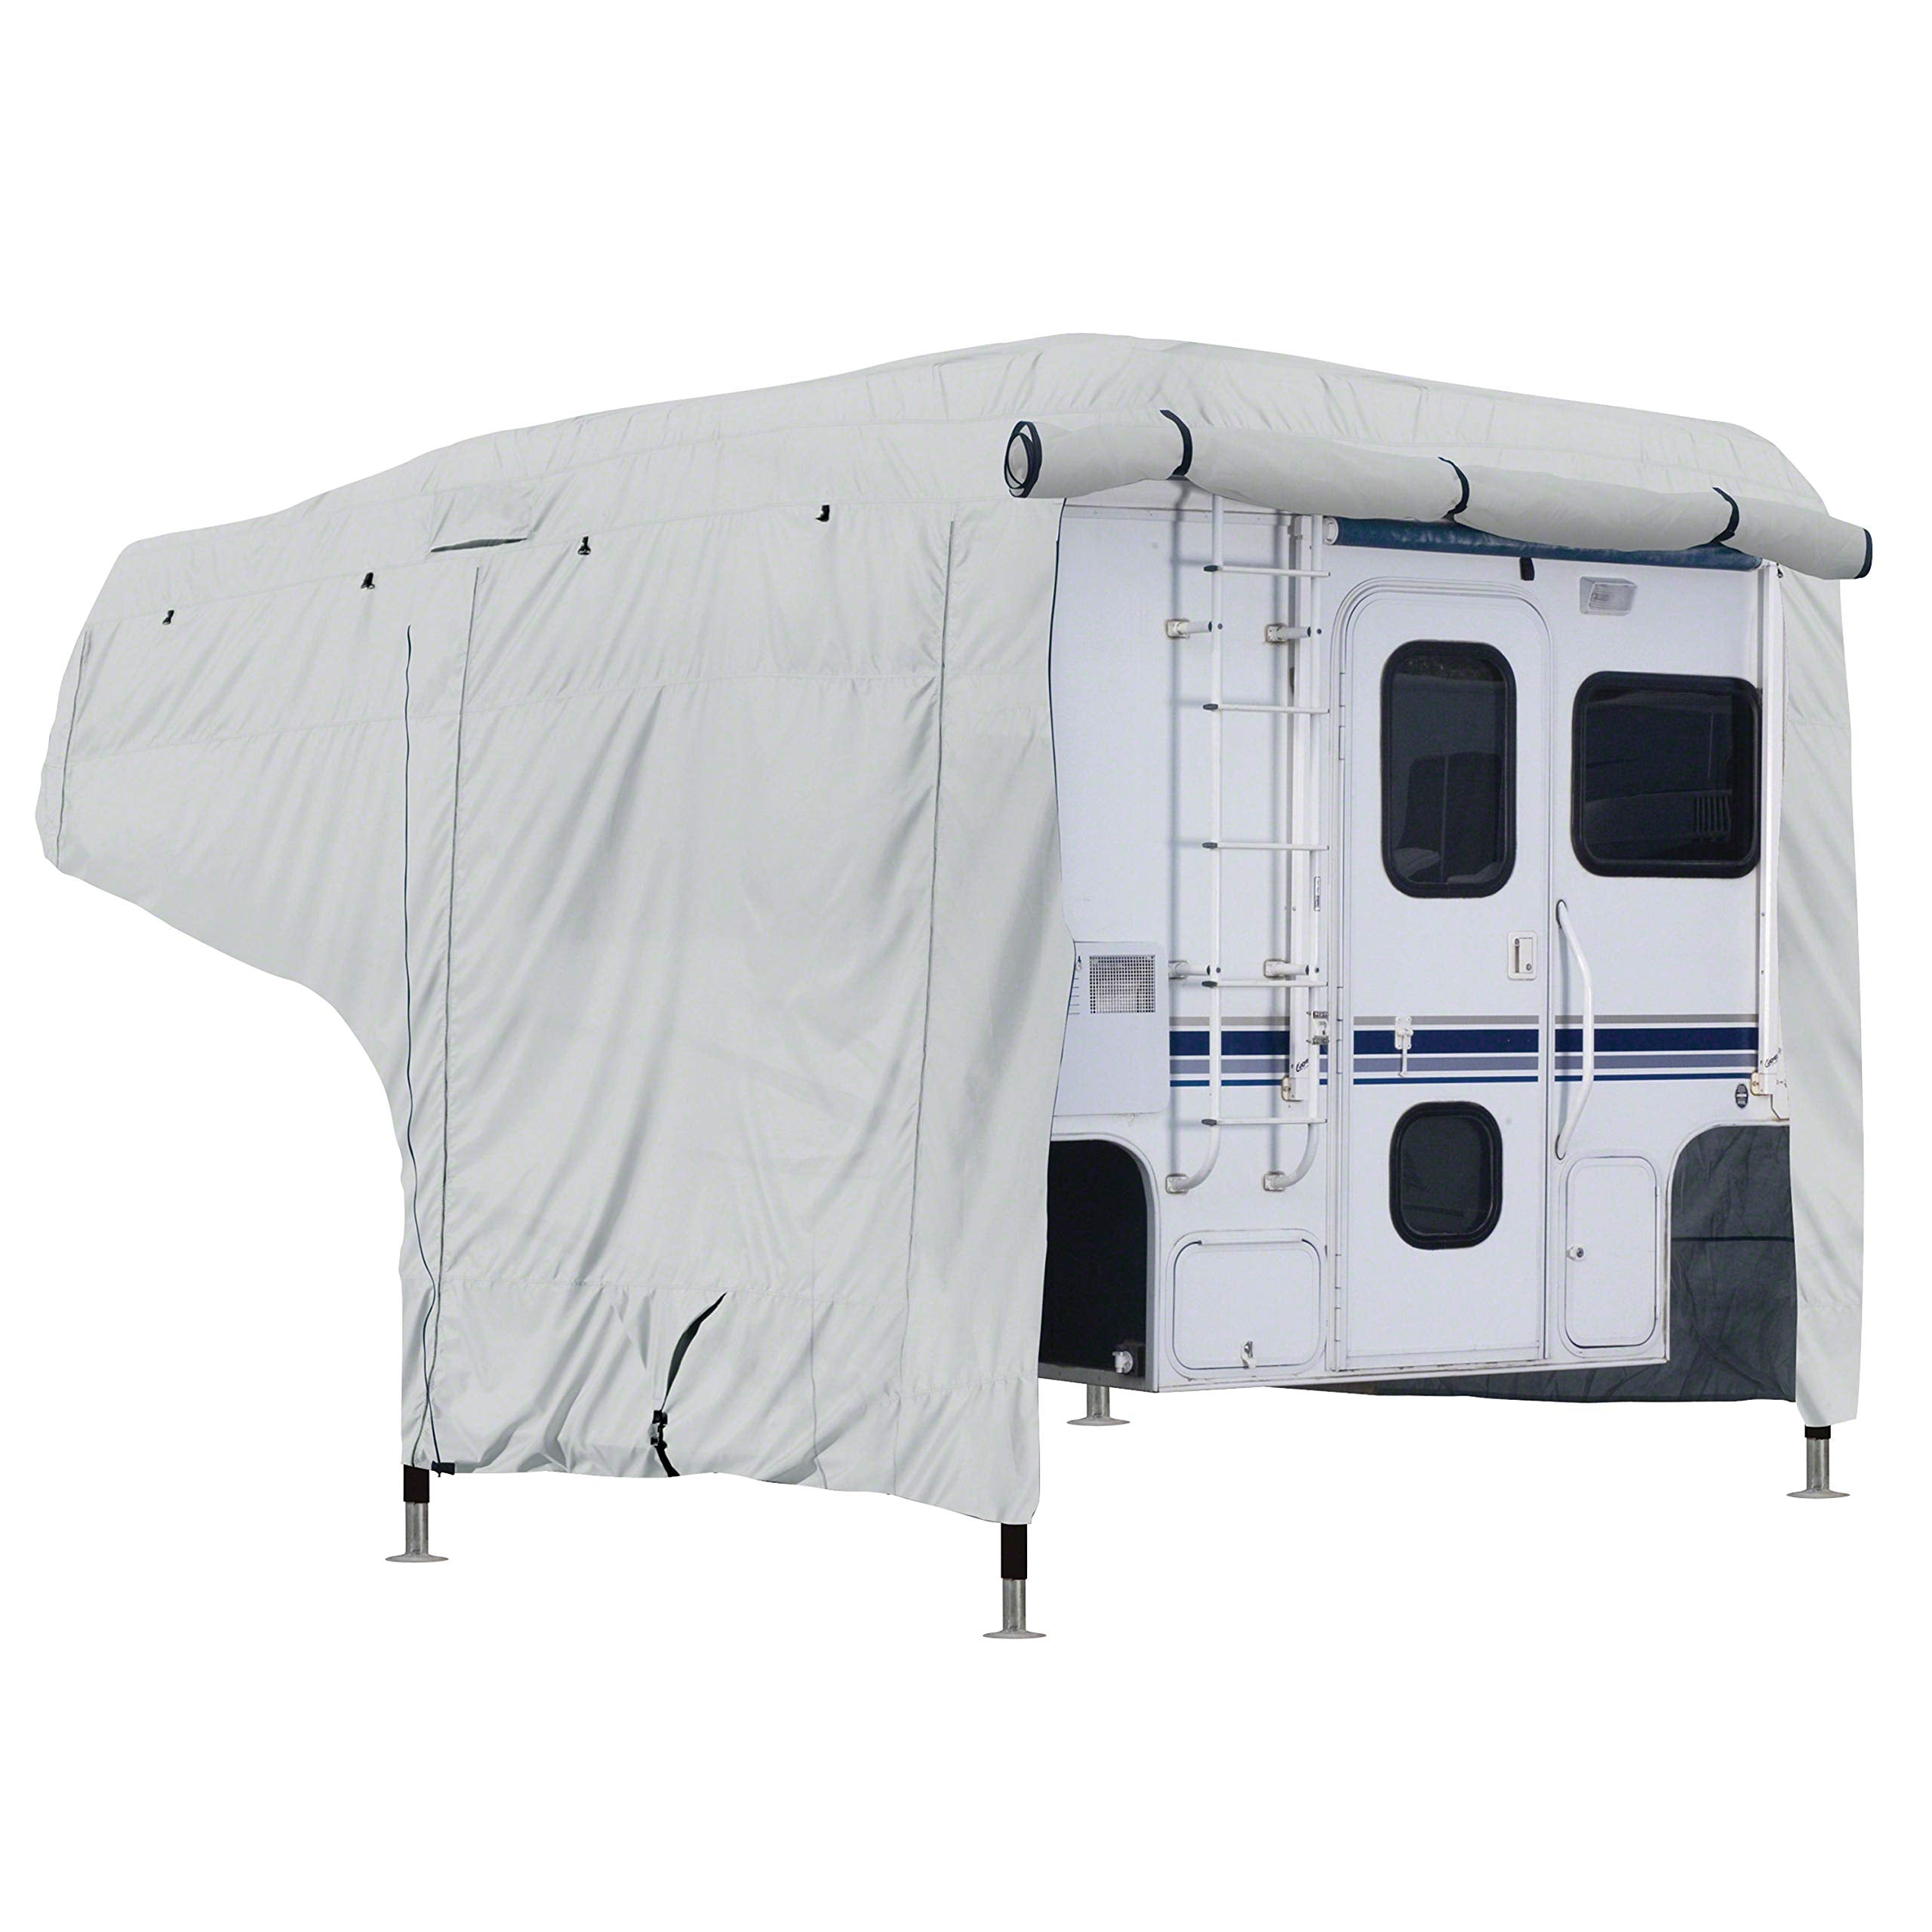 Classic Accessories OverDrive PermaPRO Deluxe Camper Cover, Fits 10' - 12'